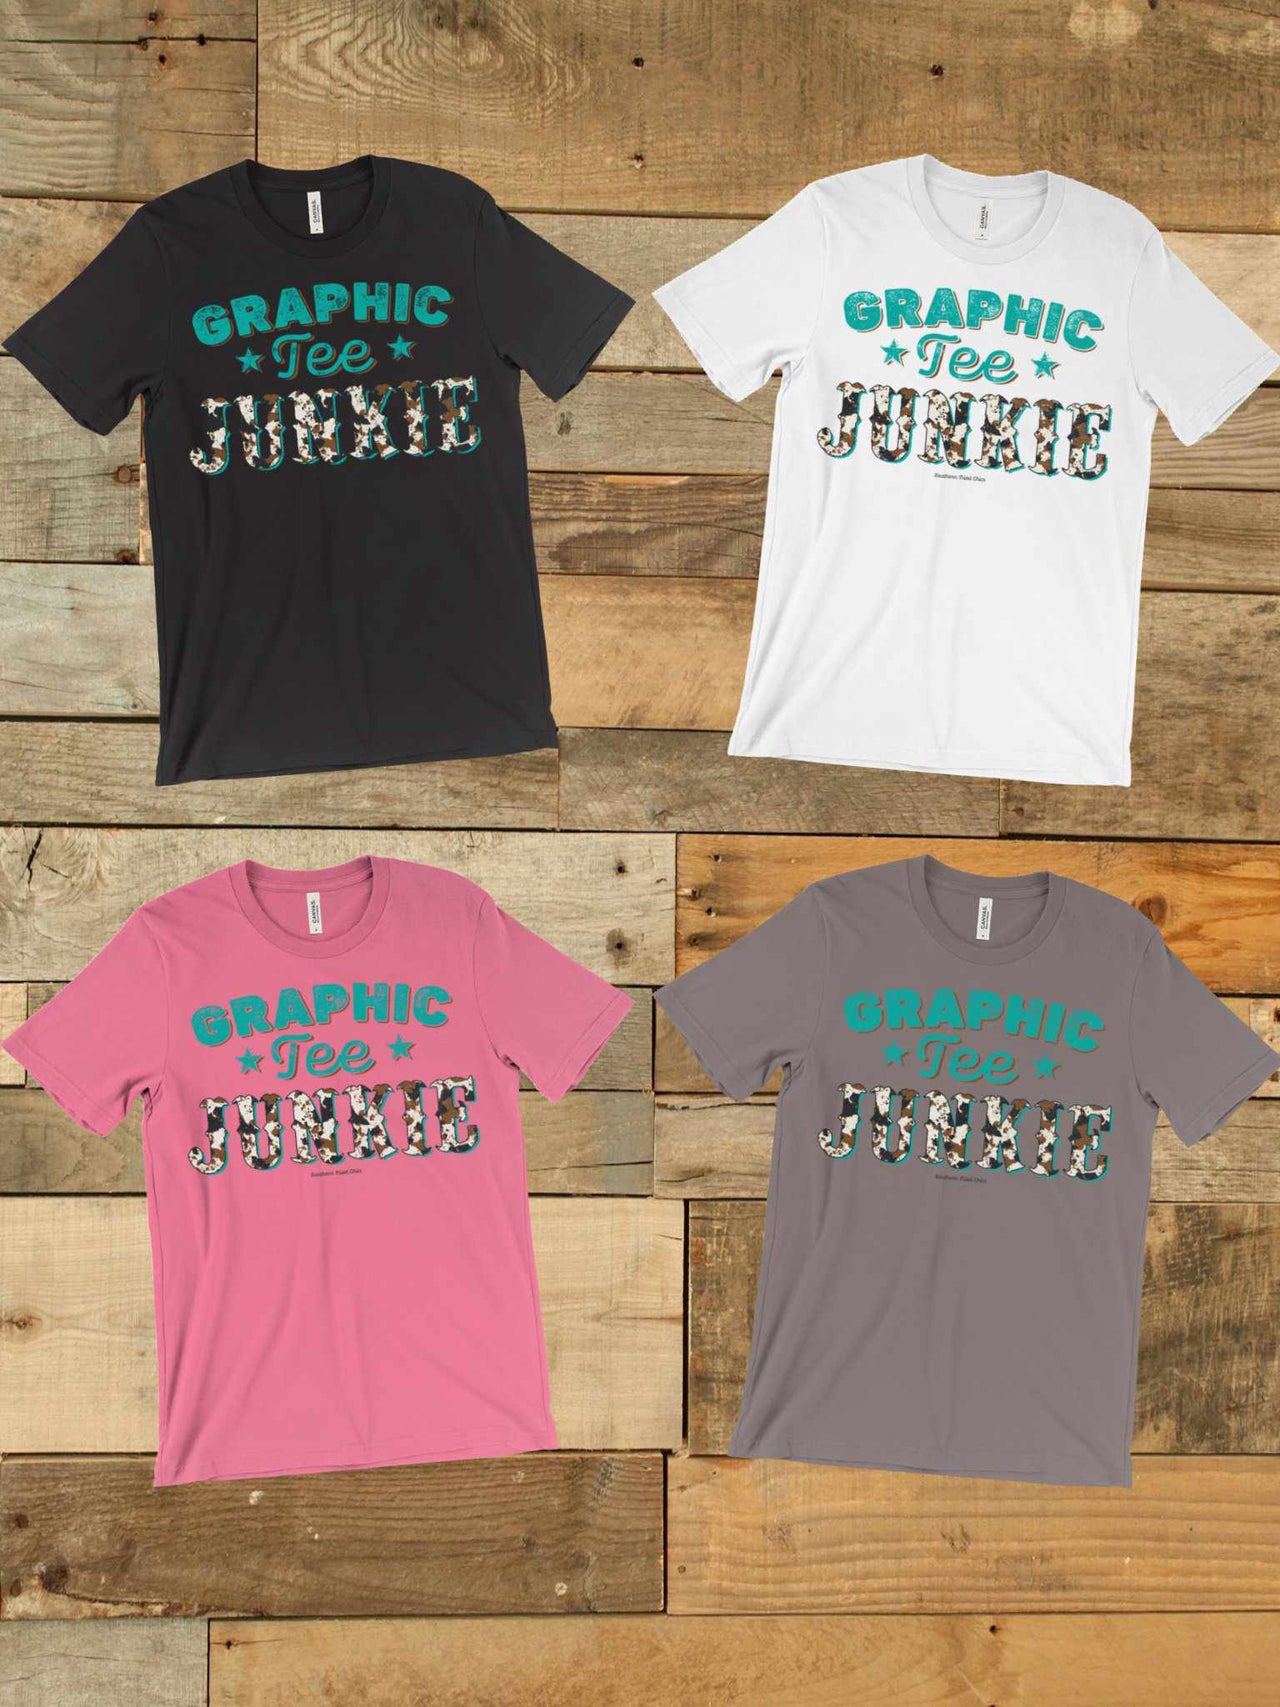 Graphic Tee Junkie Tee-Southern Fried Chics